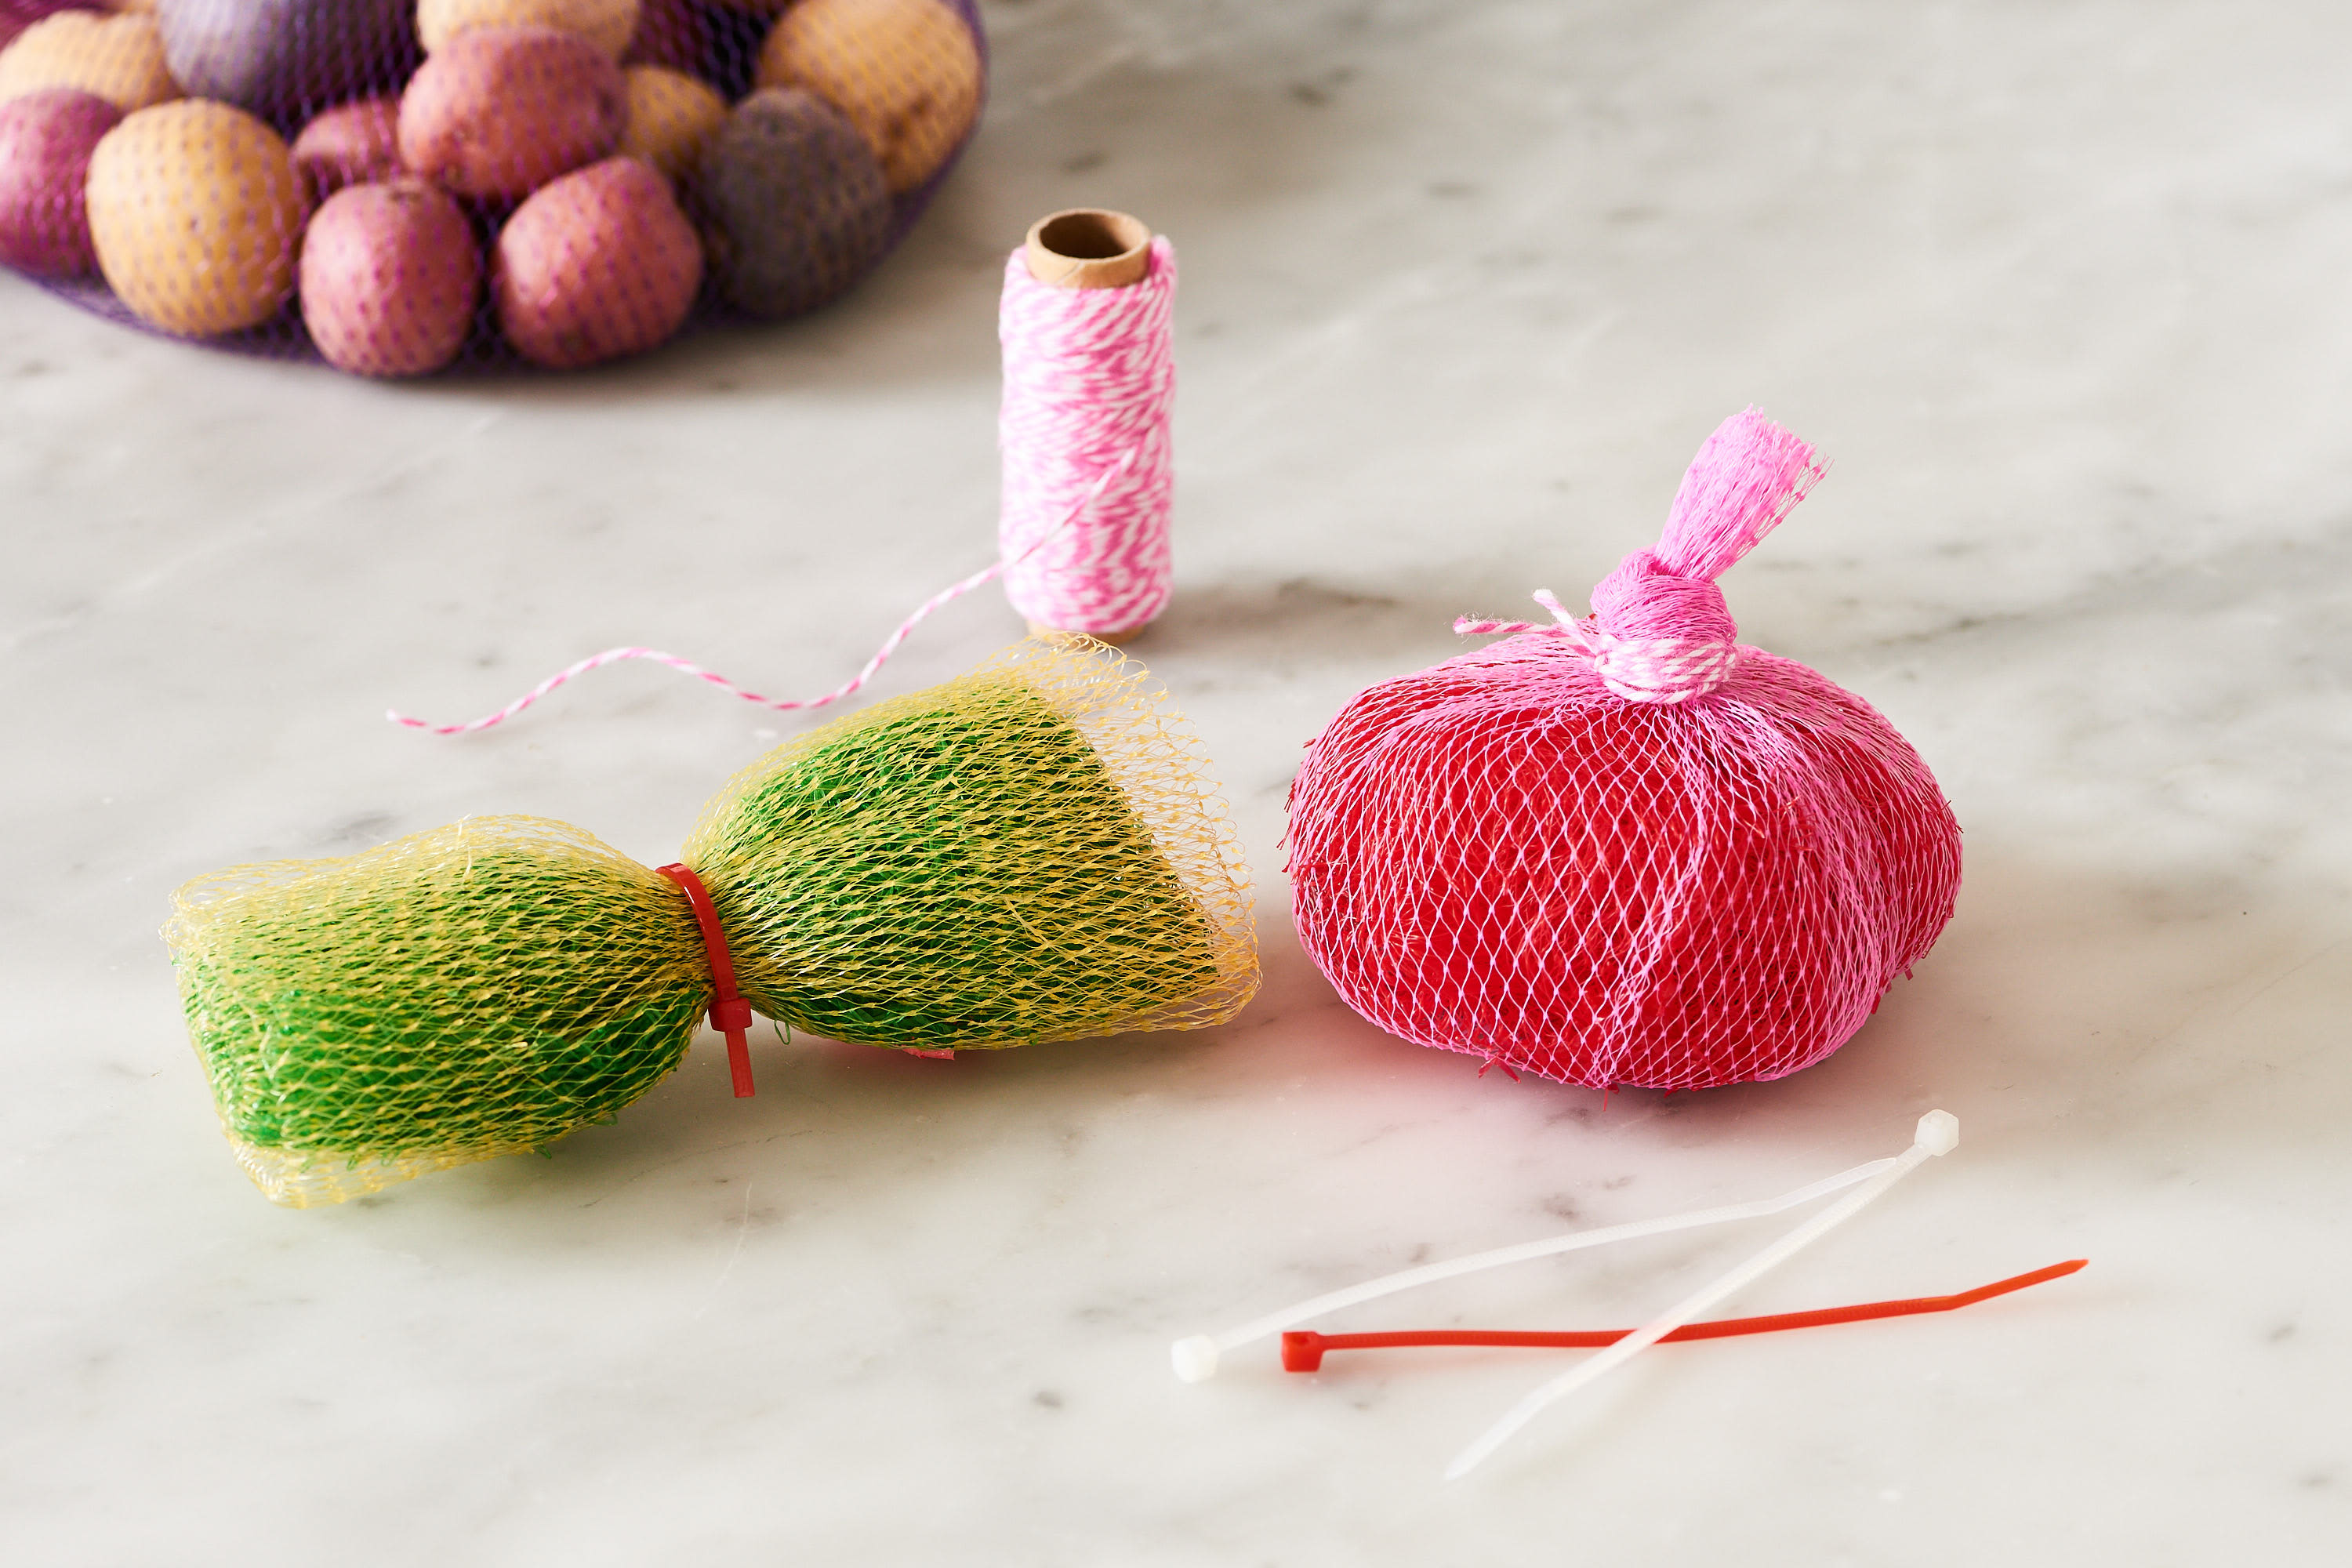 How to Make a Pot Scrubber Out of a Produce Bag